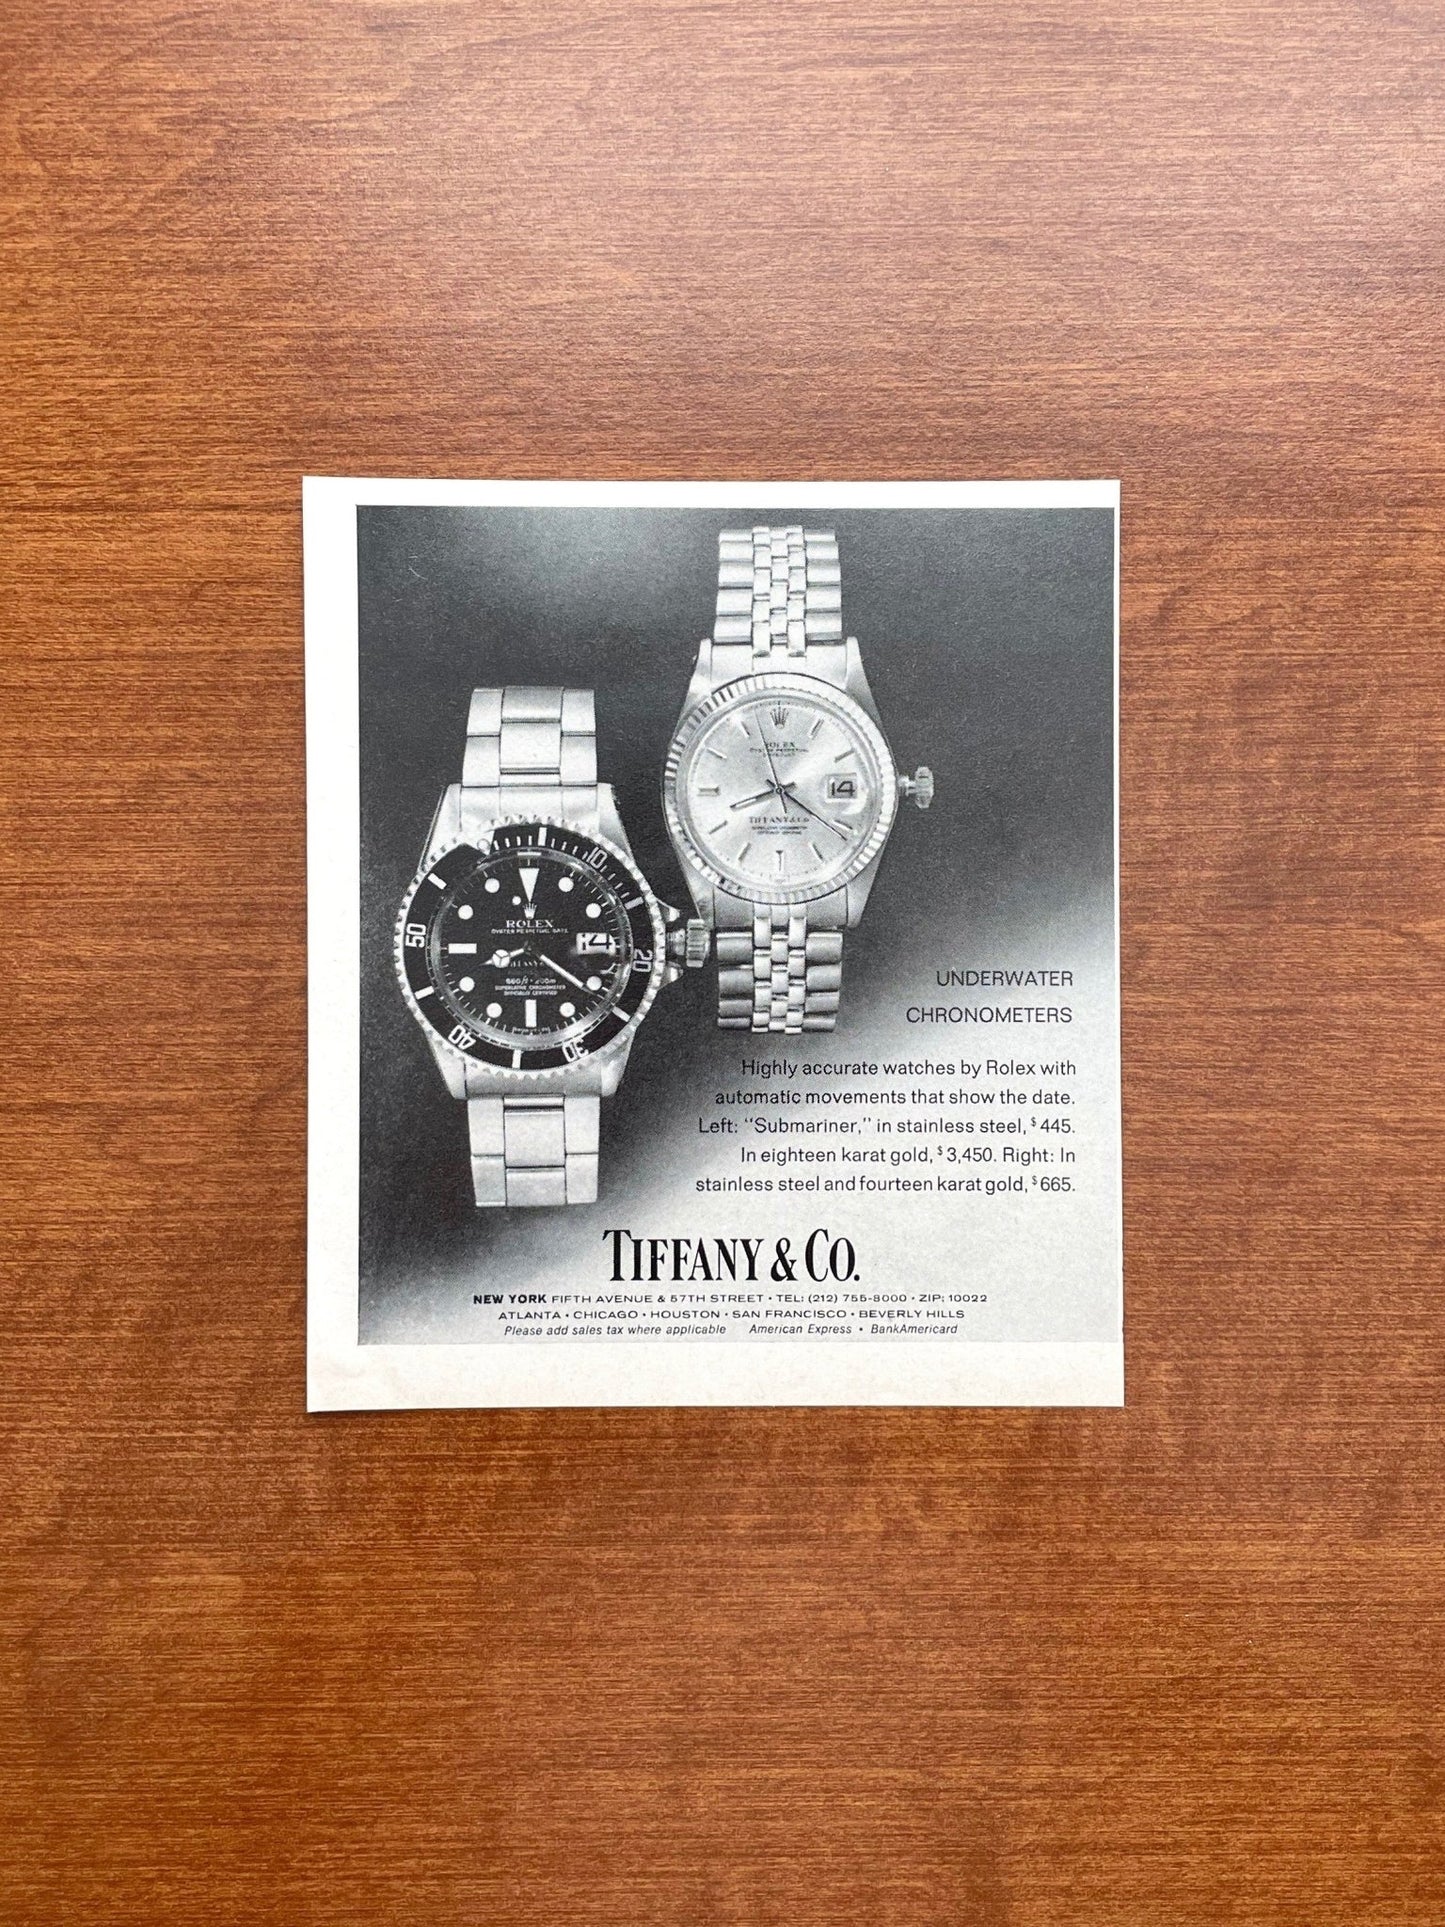 1975 Submariner and Datejust at Tiffany & Co. Advertisement